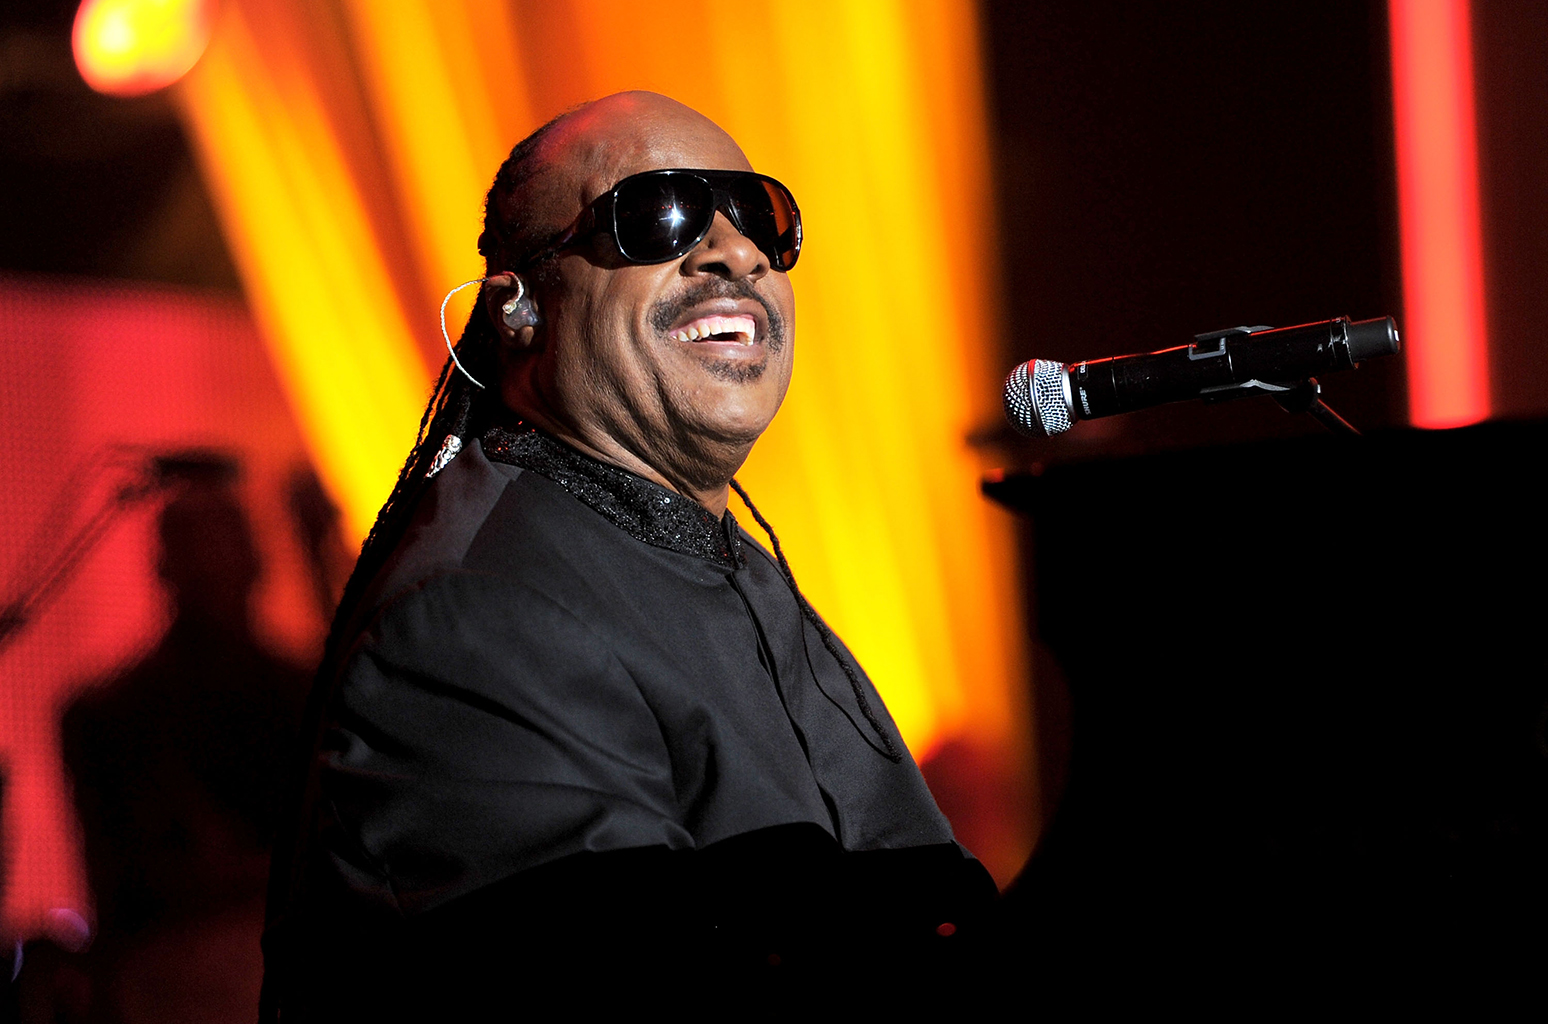 7 in 10 People Can’t Get Over 15/20 on This All-Rounded Trivia Challenge — Can You Impress Me? Stevie Wonder